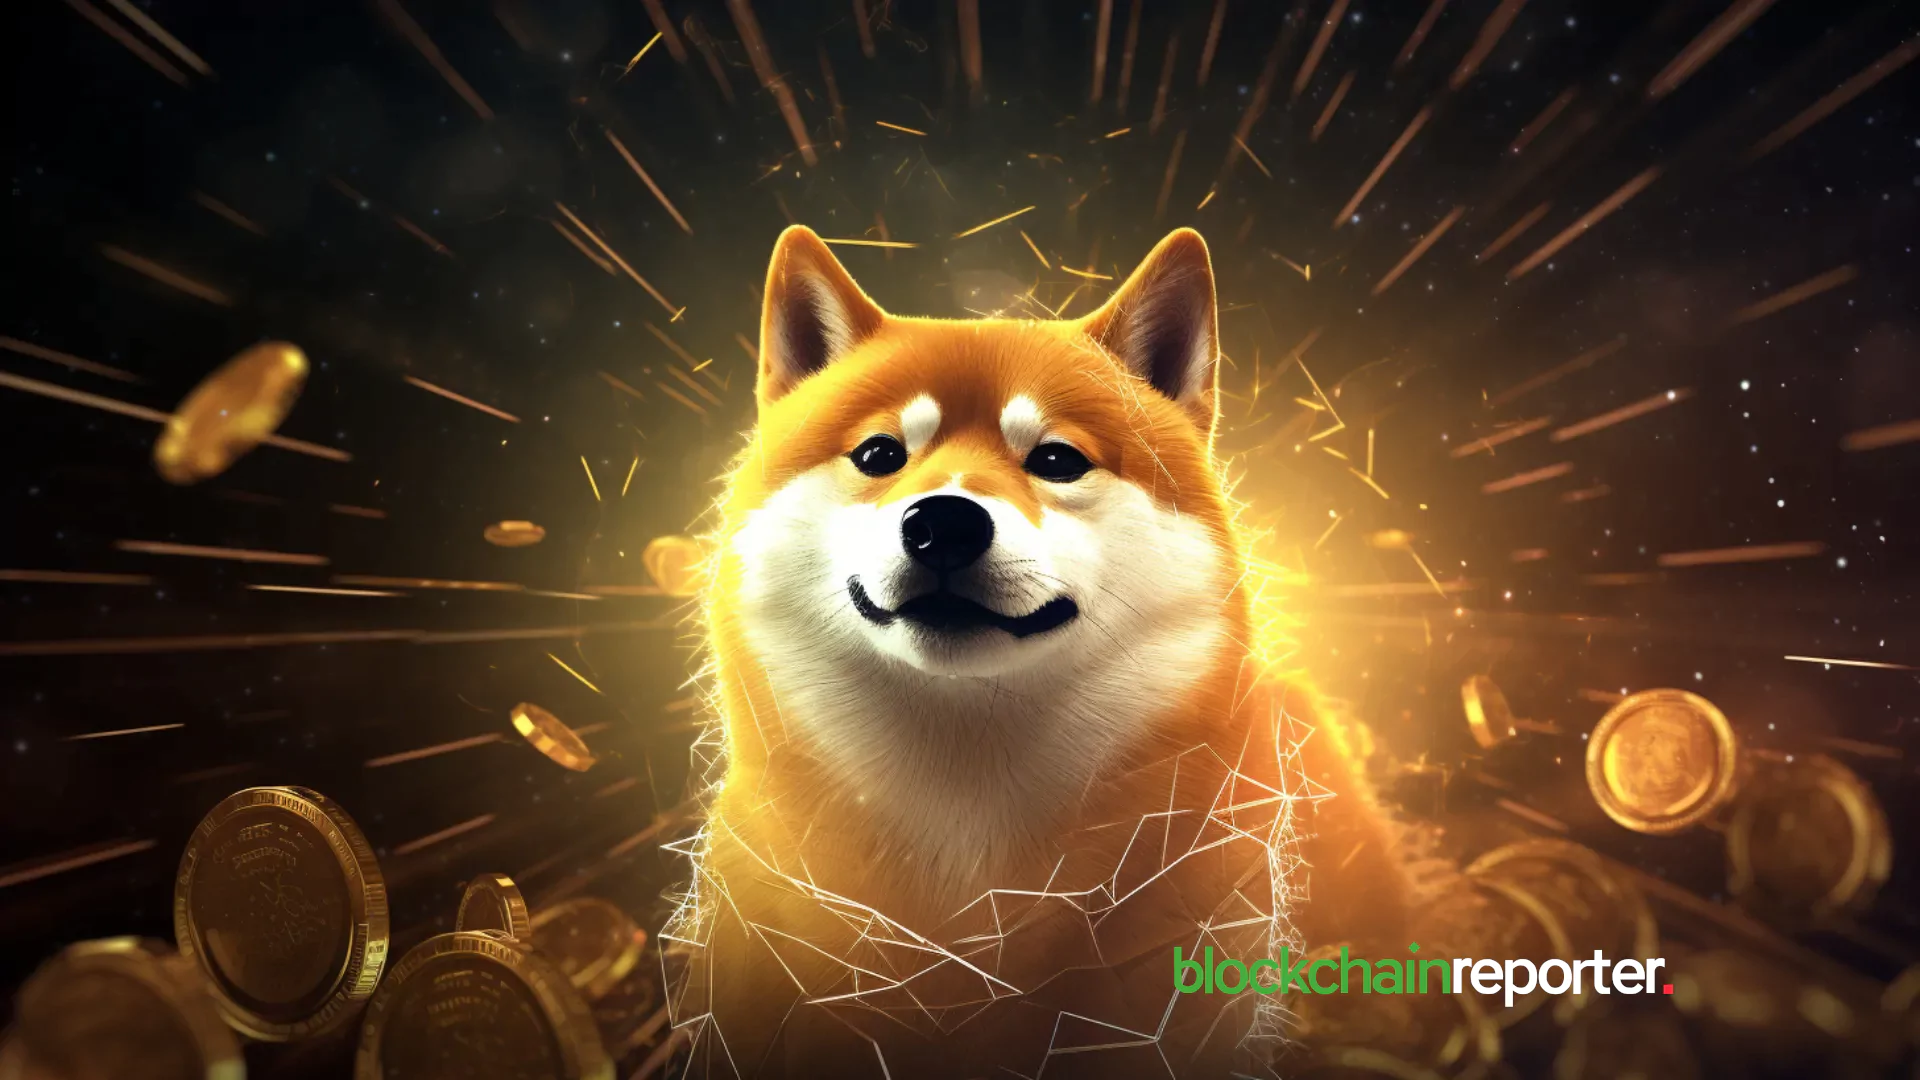 From Bitcoin to Dogecoin: Here Are The Top Cryptos Making Holders Rich